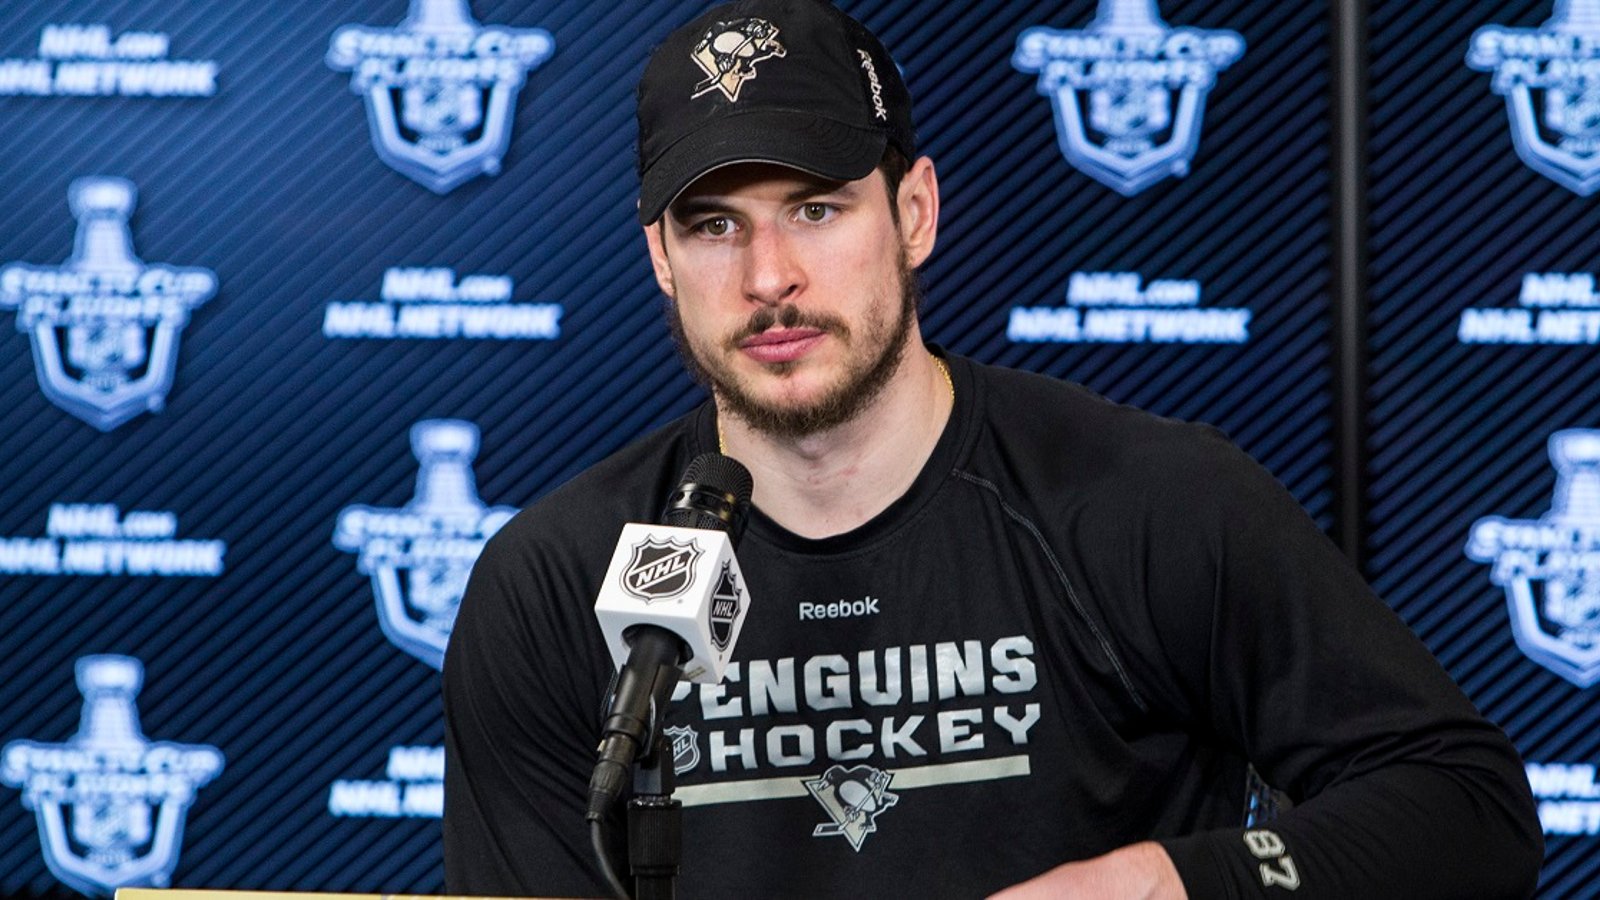 Breaking: HUGE update on Sidney Crosby's concussion.